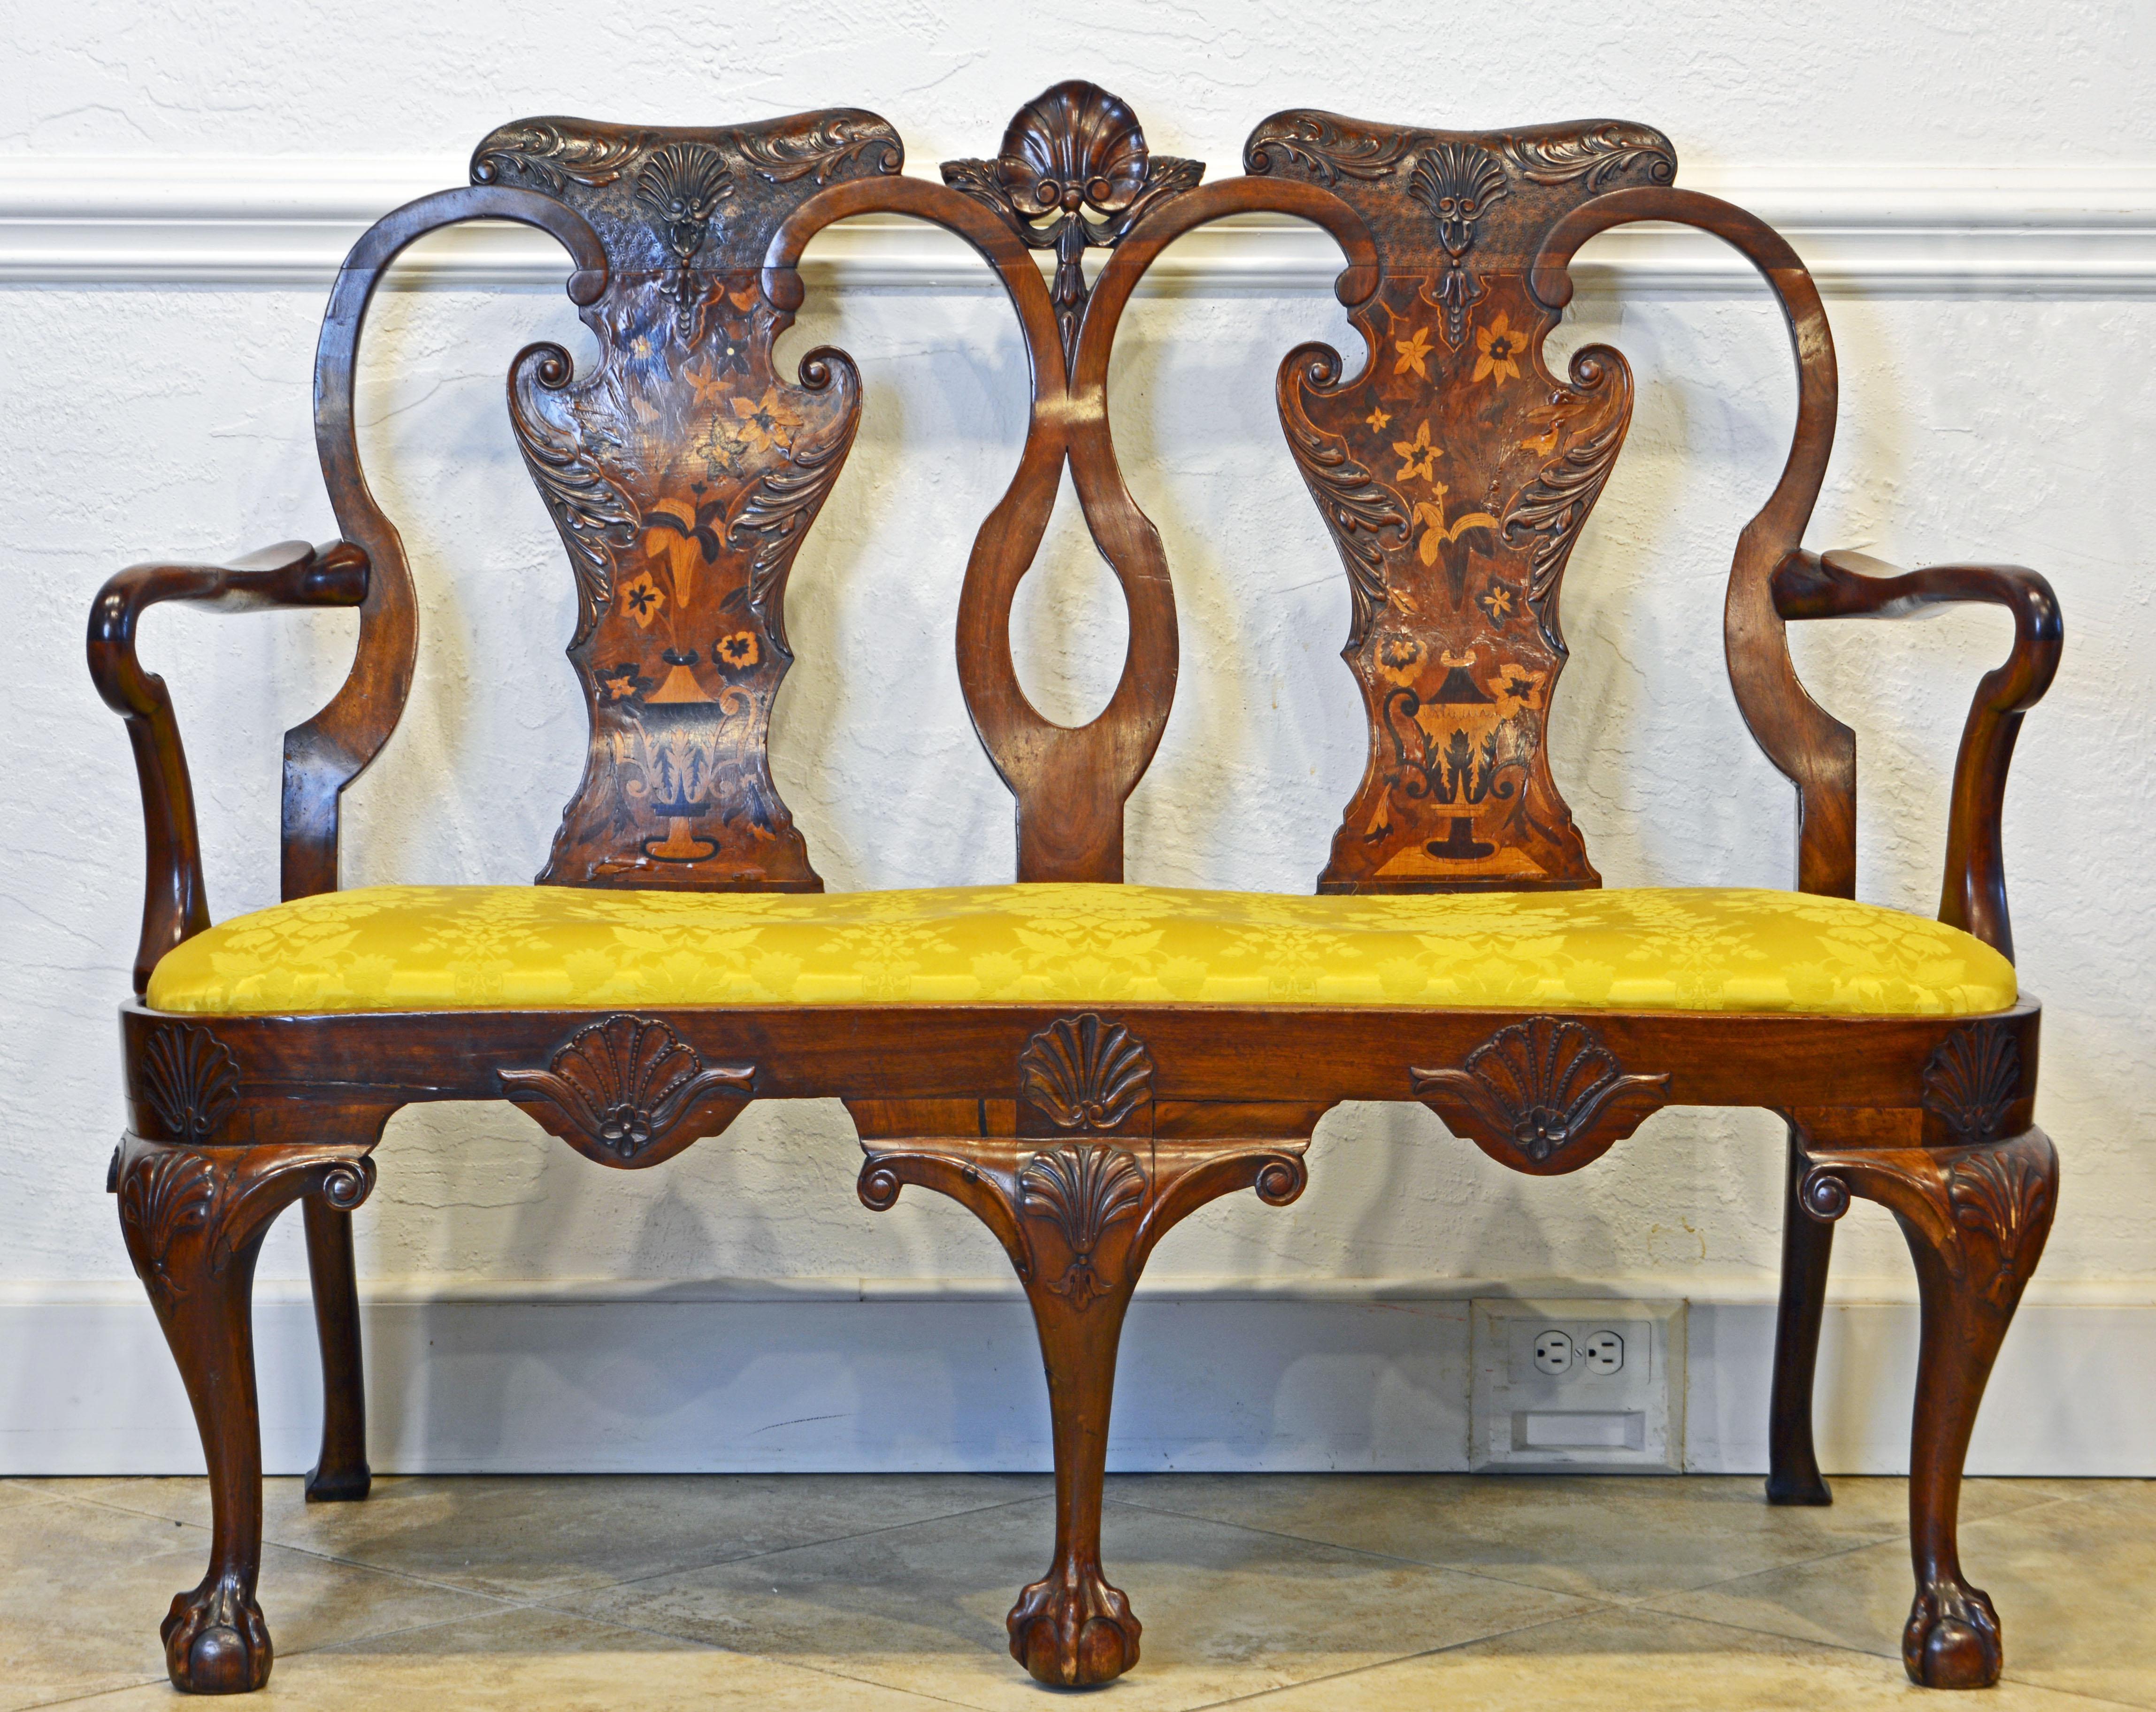 This English Chippendale style settee dates to the late 1900s and features an elegantly shaped frame adorned by leaf and shell carvings as well as fine inlay with flowers and urns on the back splats. It rests on three carved cabriole front legs